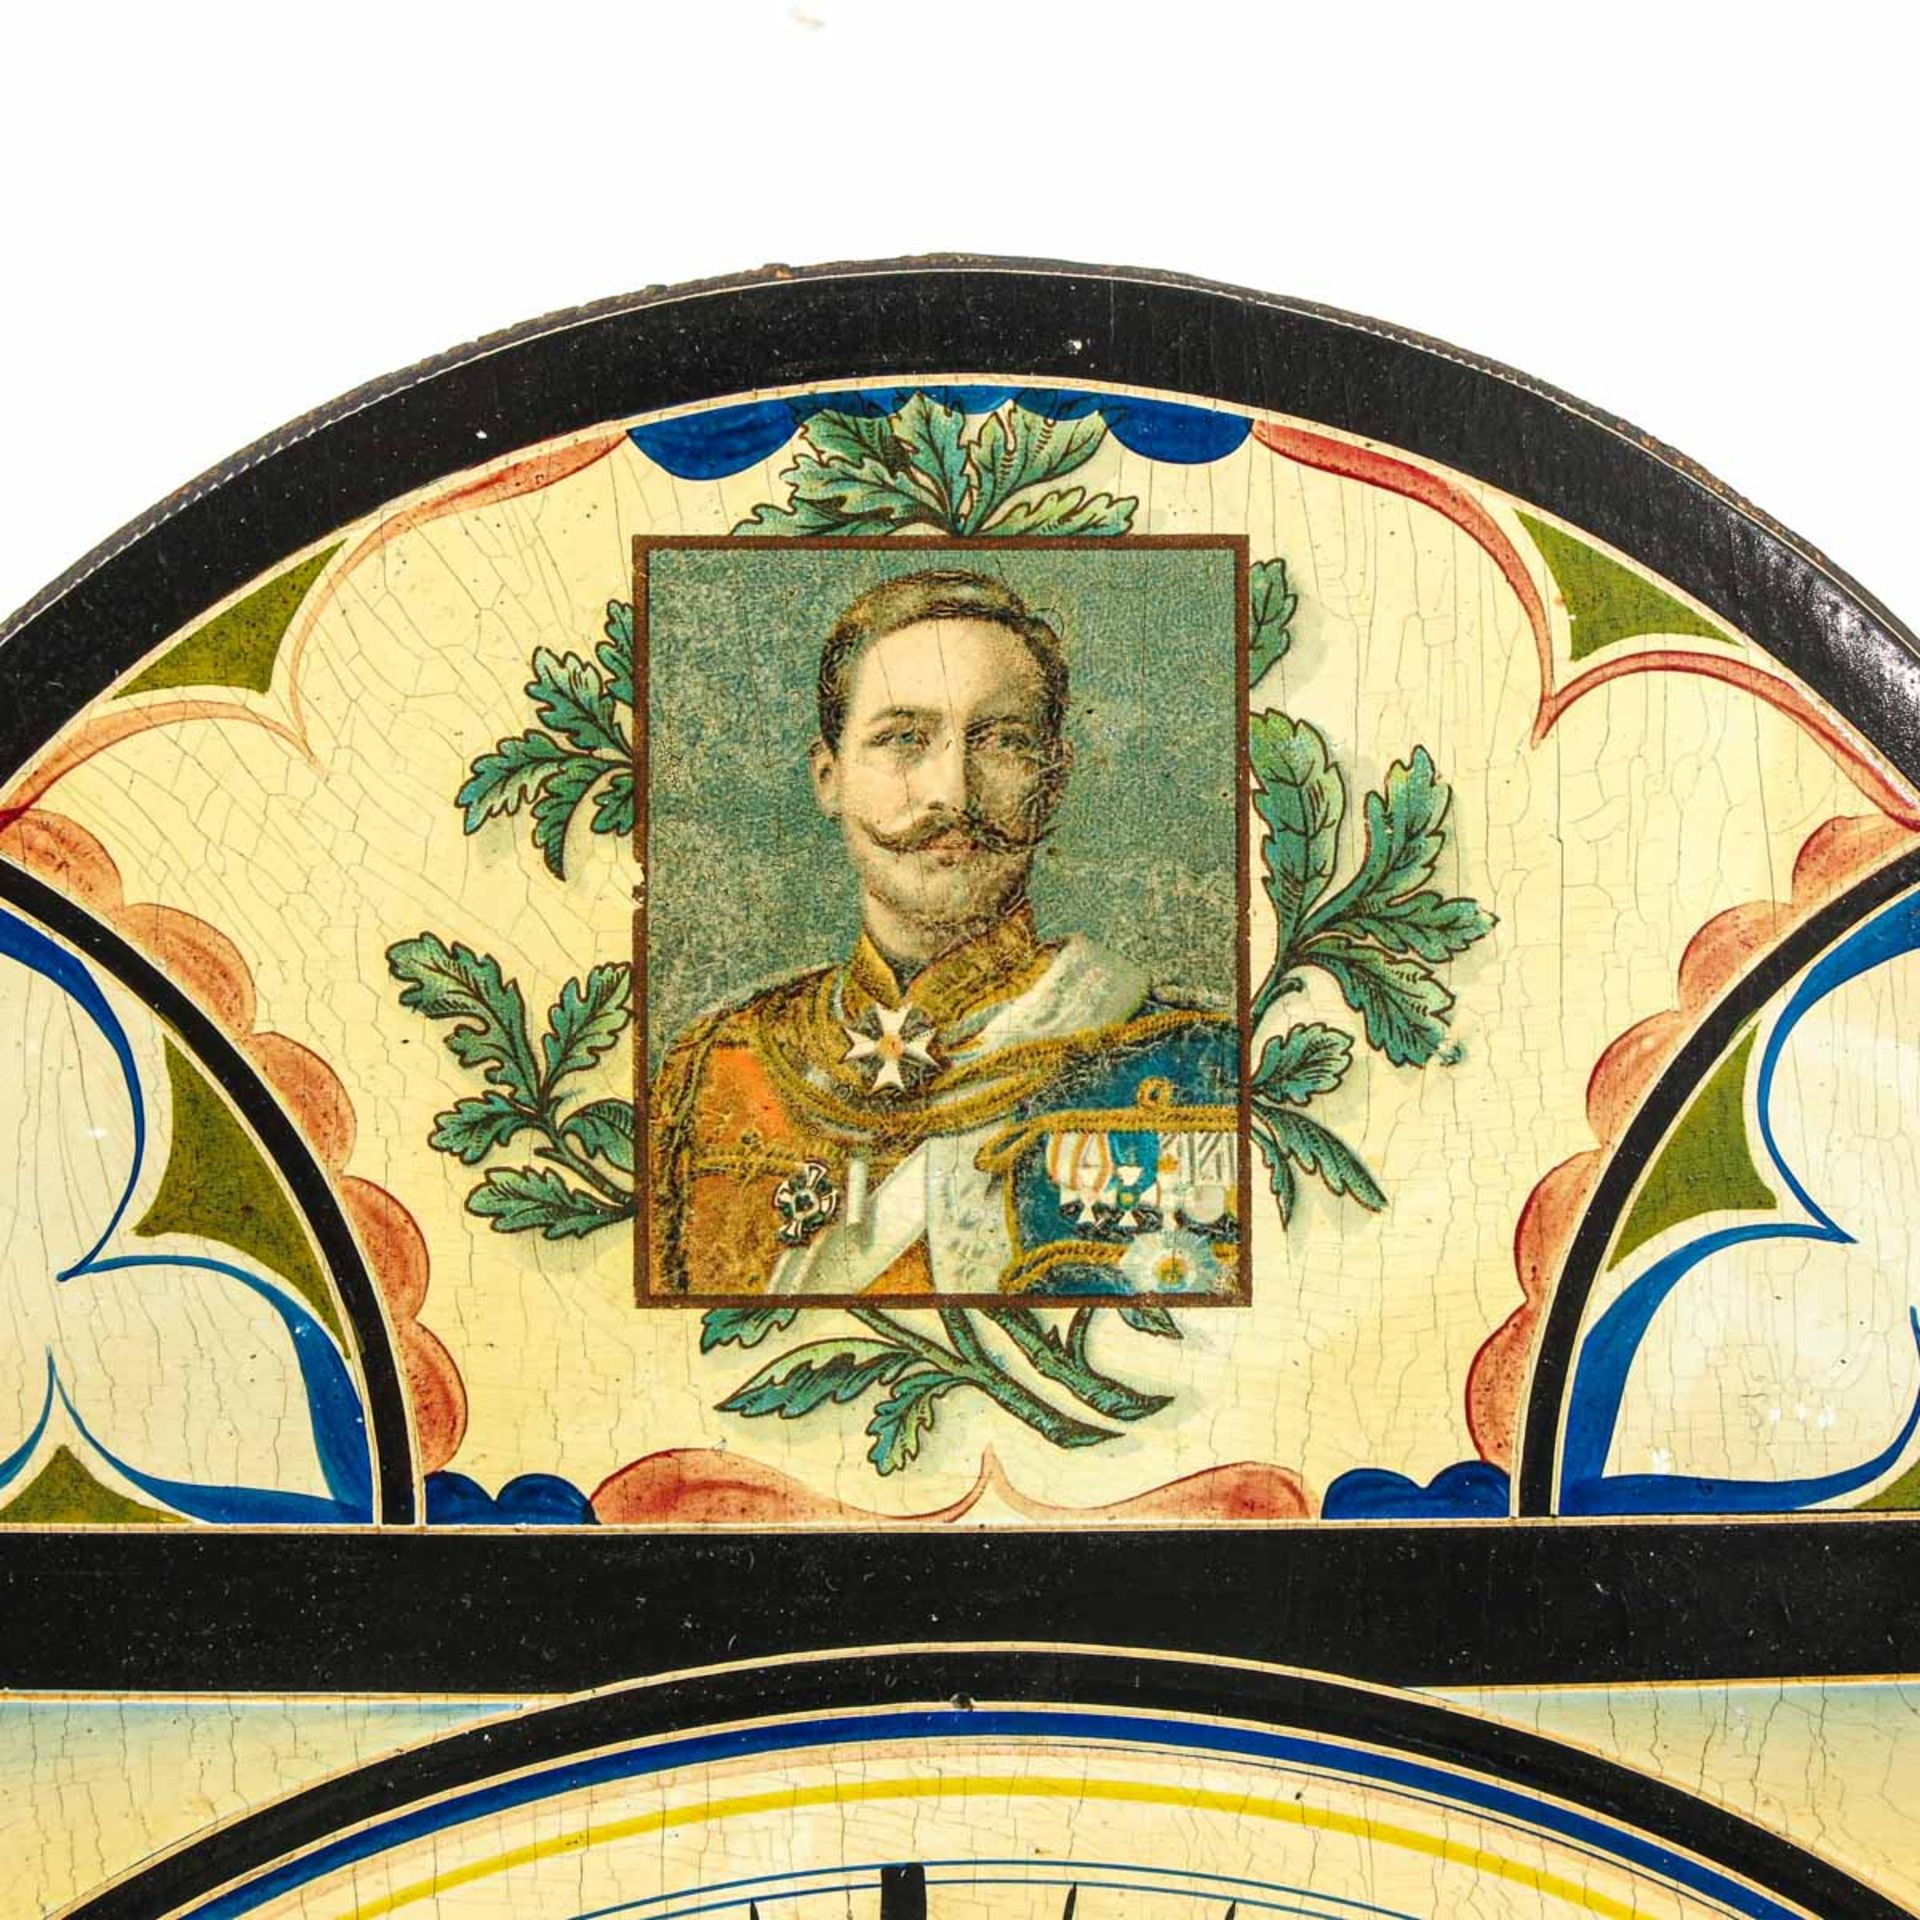 A 19th Century German Wall Clock or Appelklok - Image 6 of 7